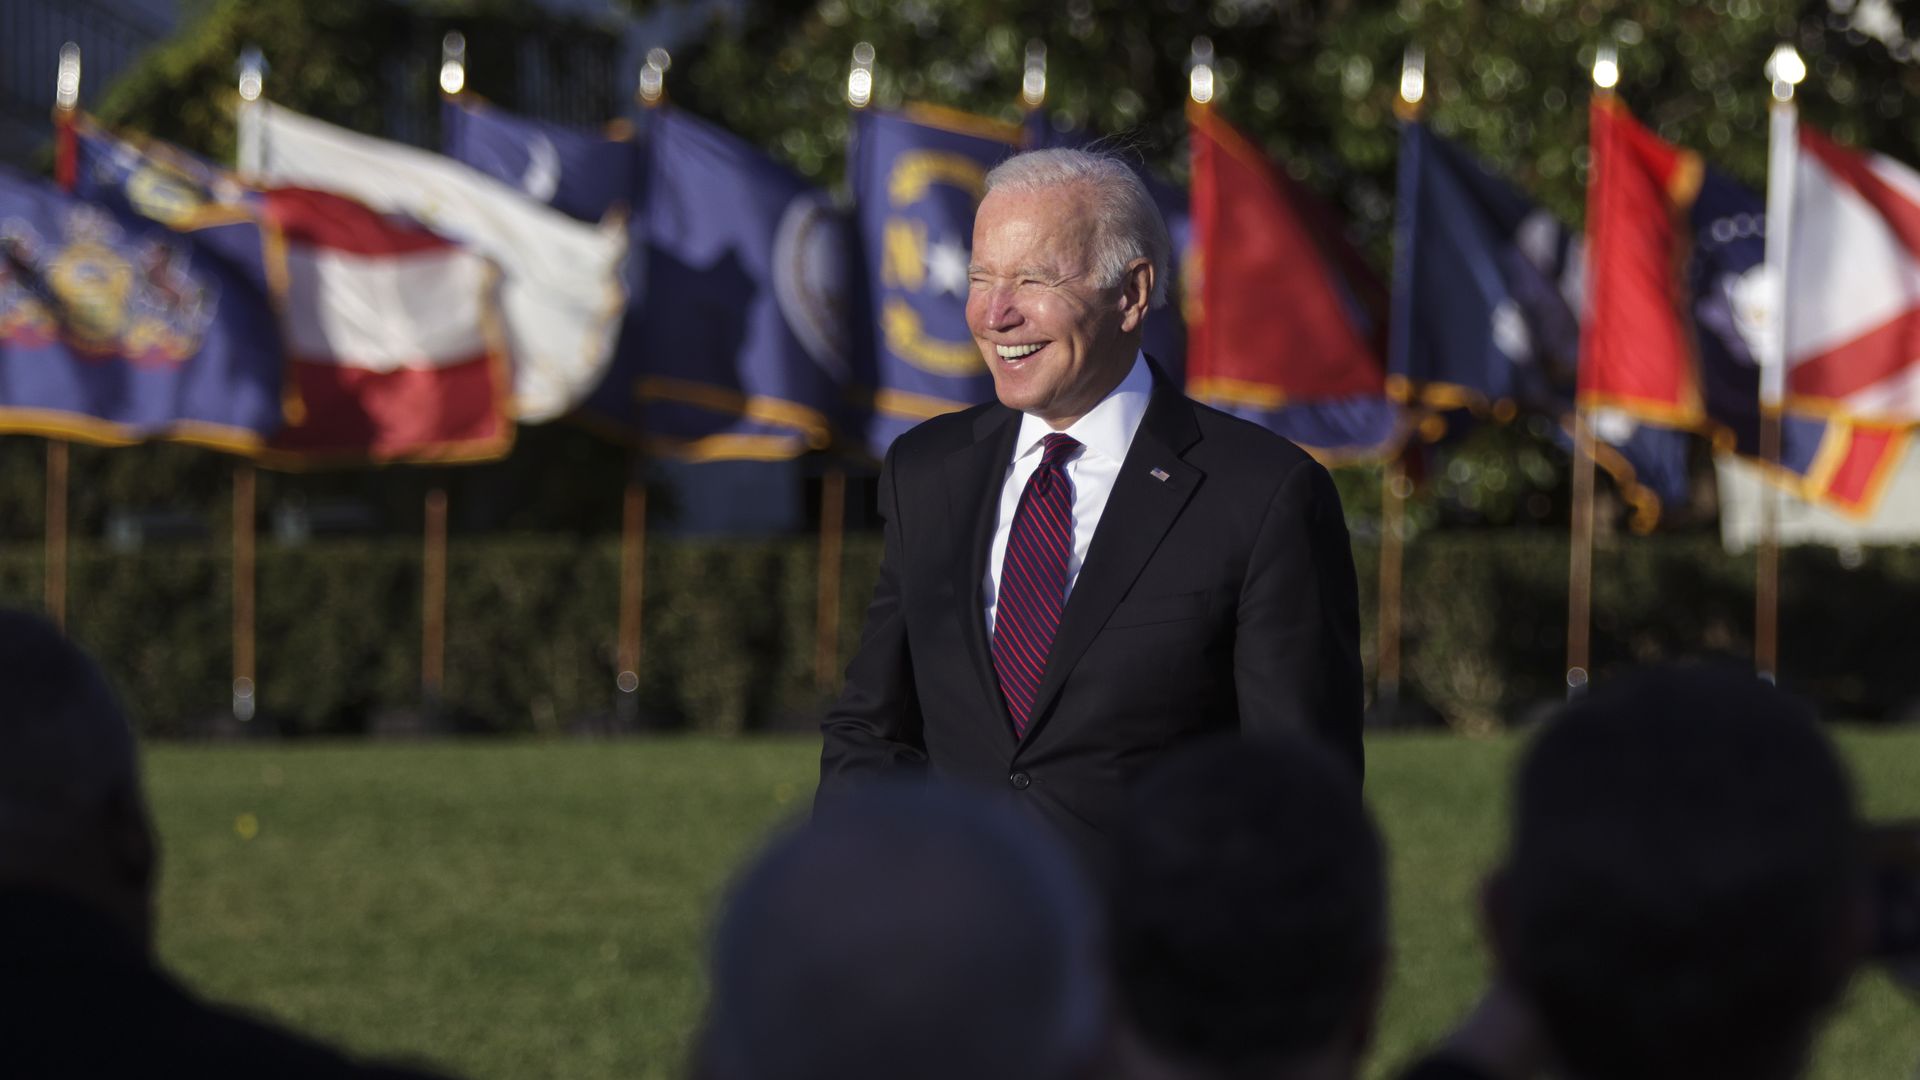 Photo of Joe Biden smiling on the White House lawn in front of an audience